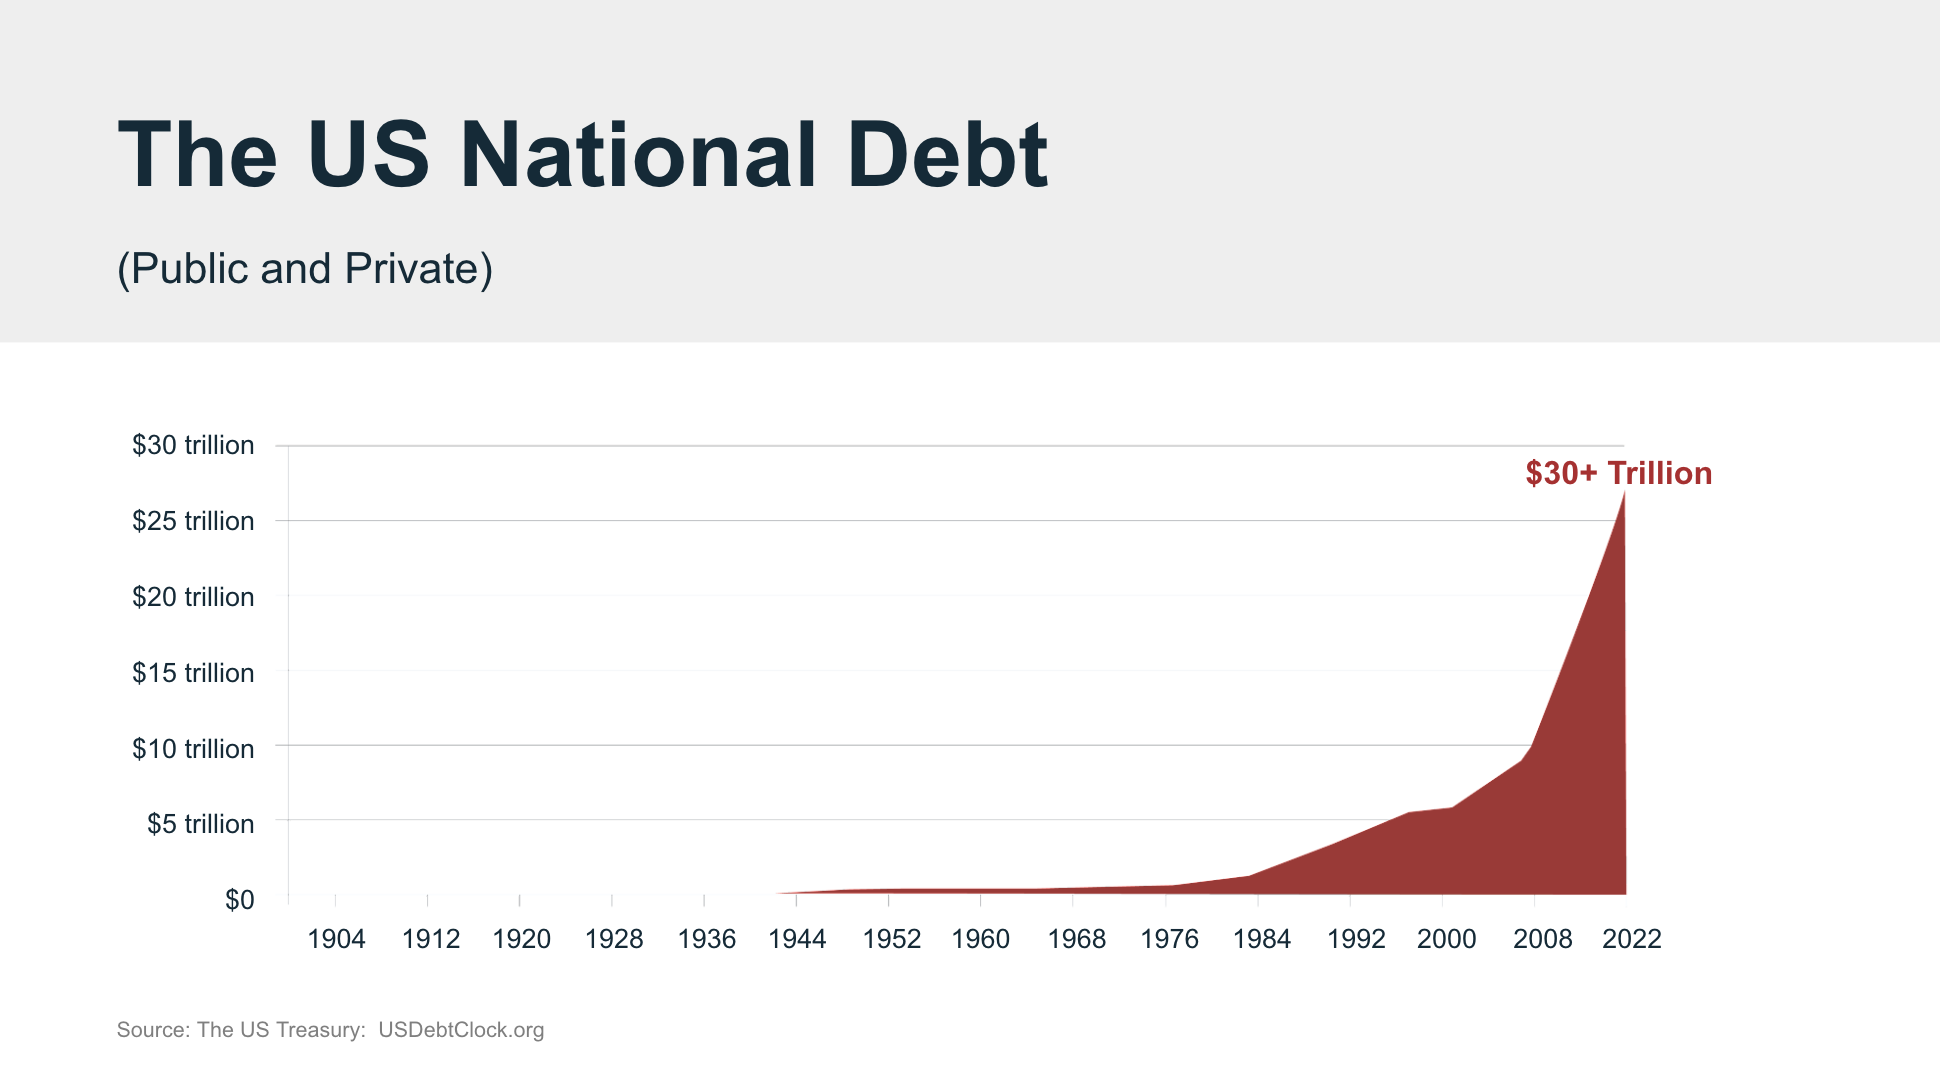 The US National Debt